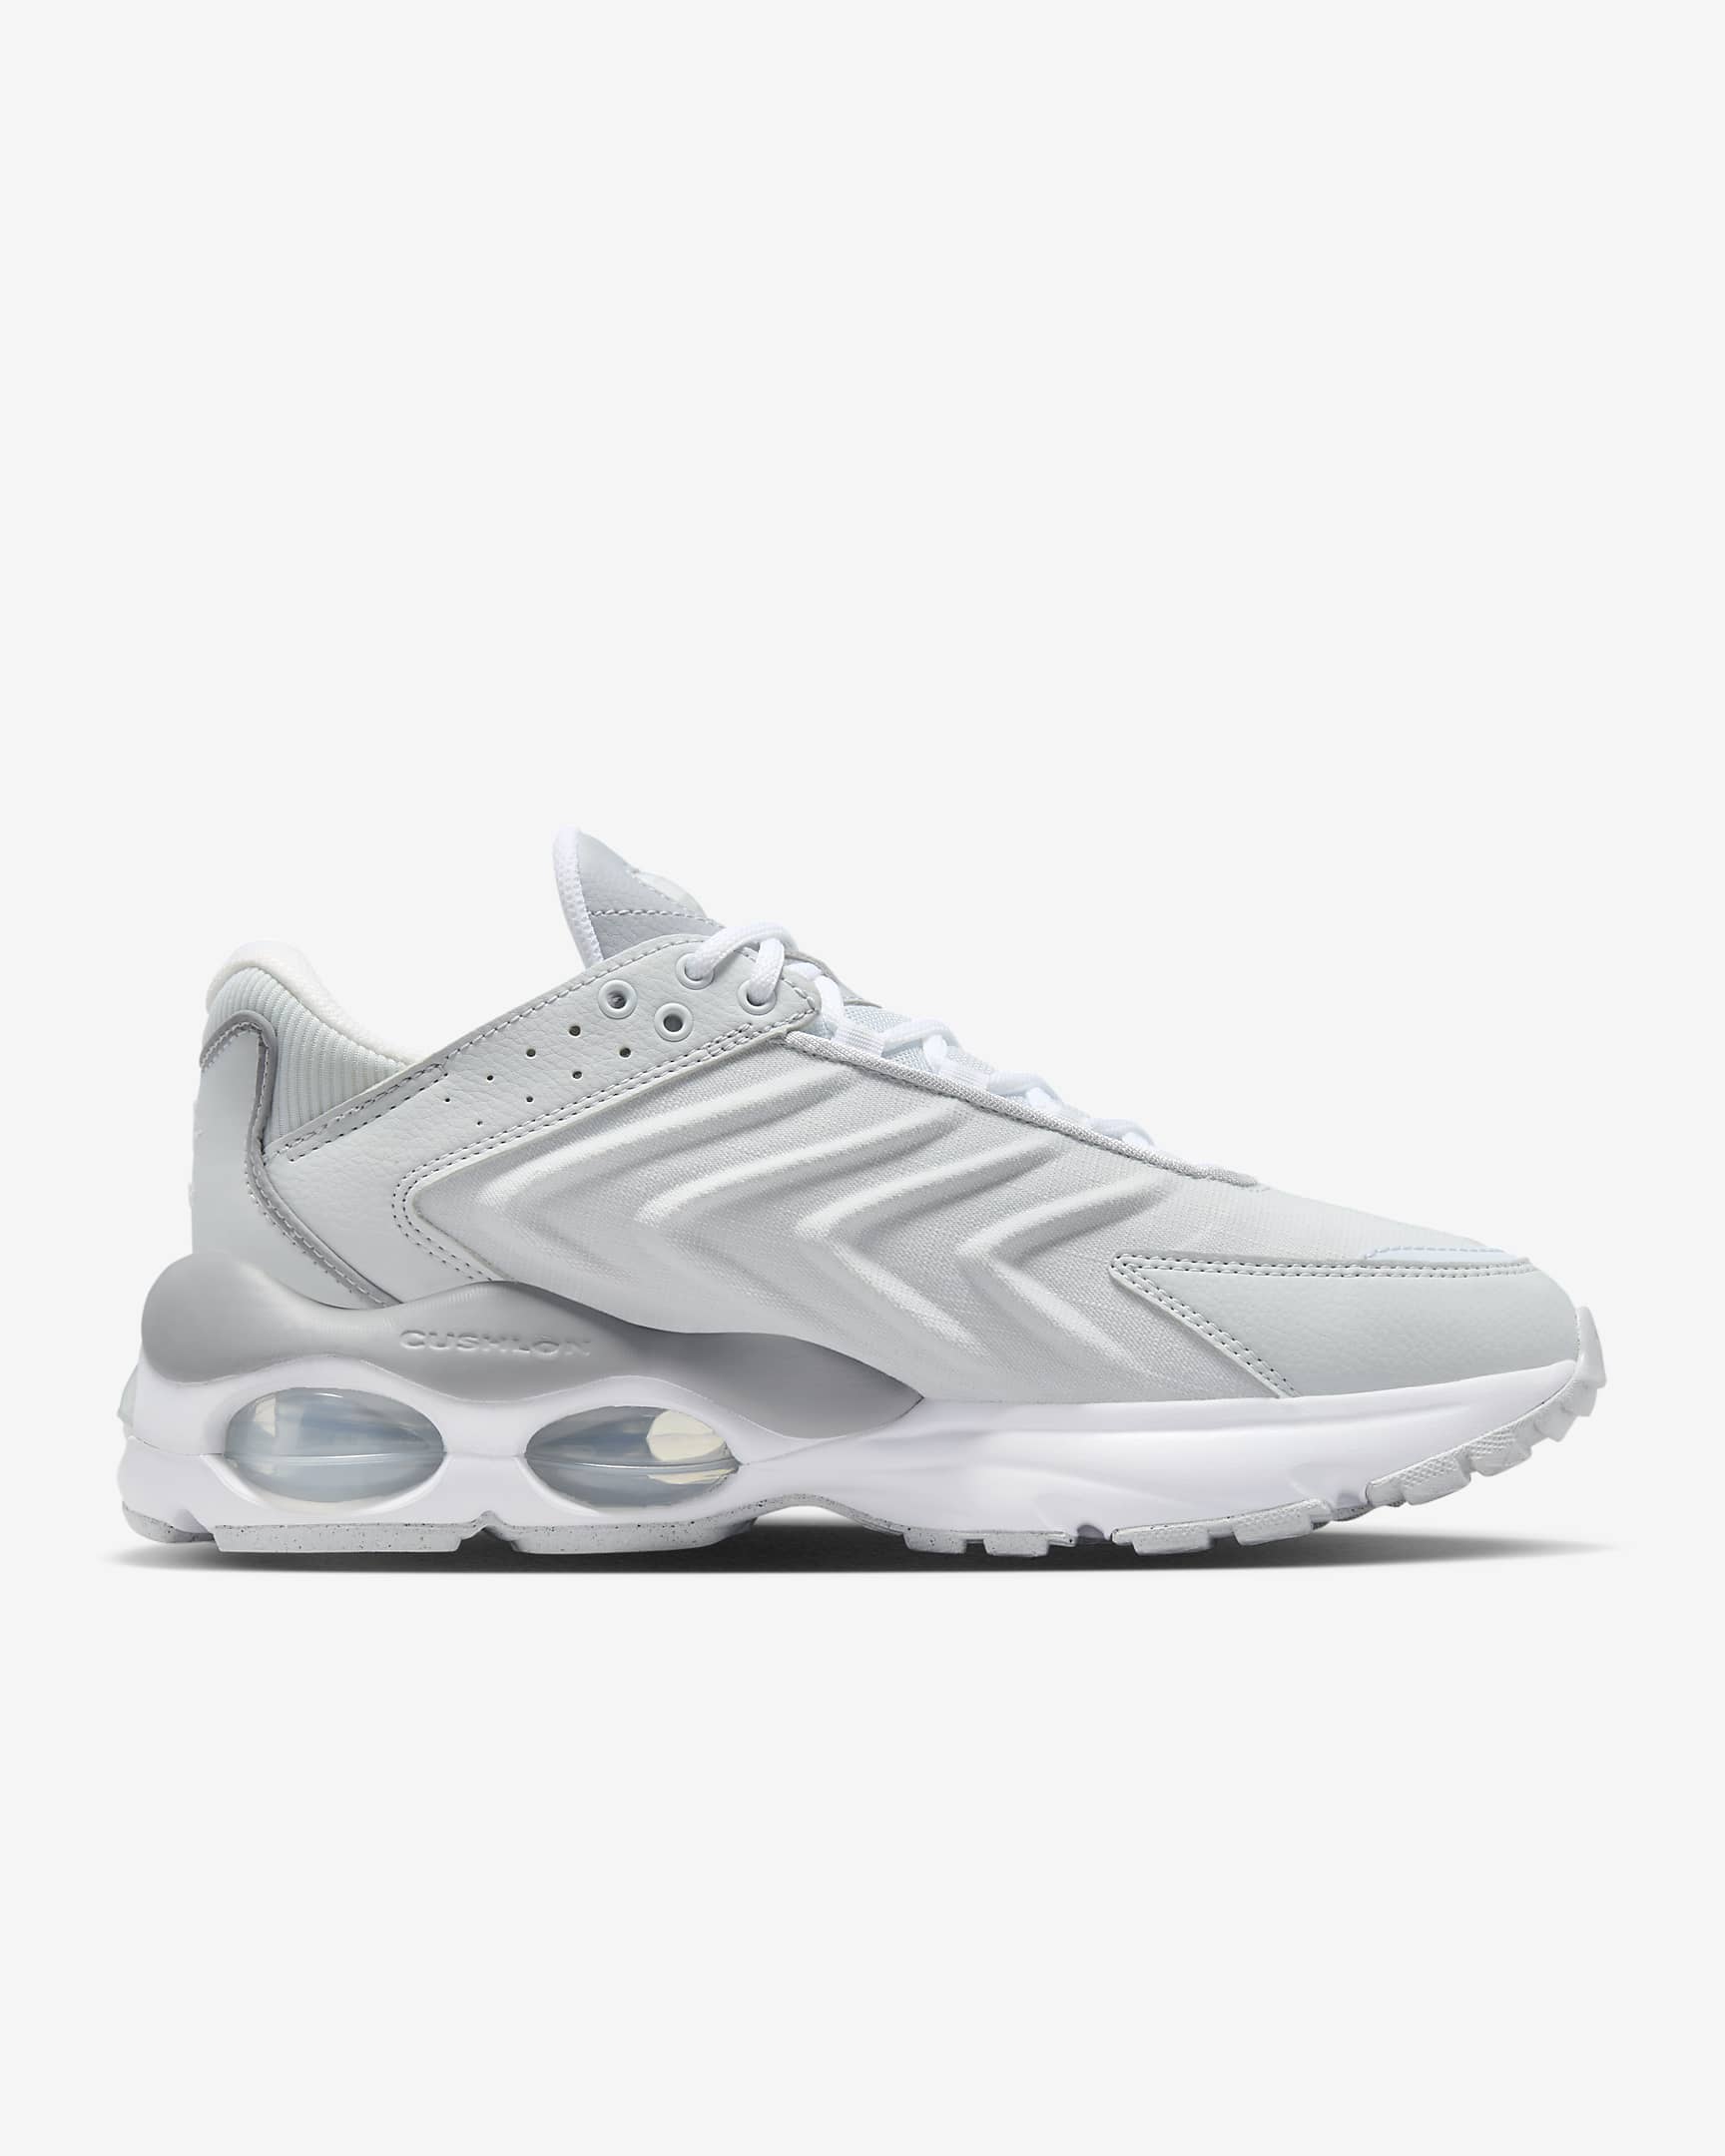 Nike Air Max TW Men's Shoes - Pure Platinum/Wolf Grey/White/White